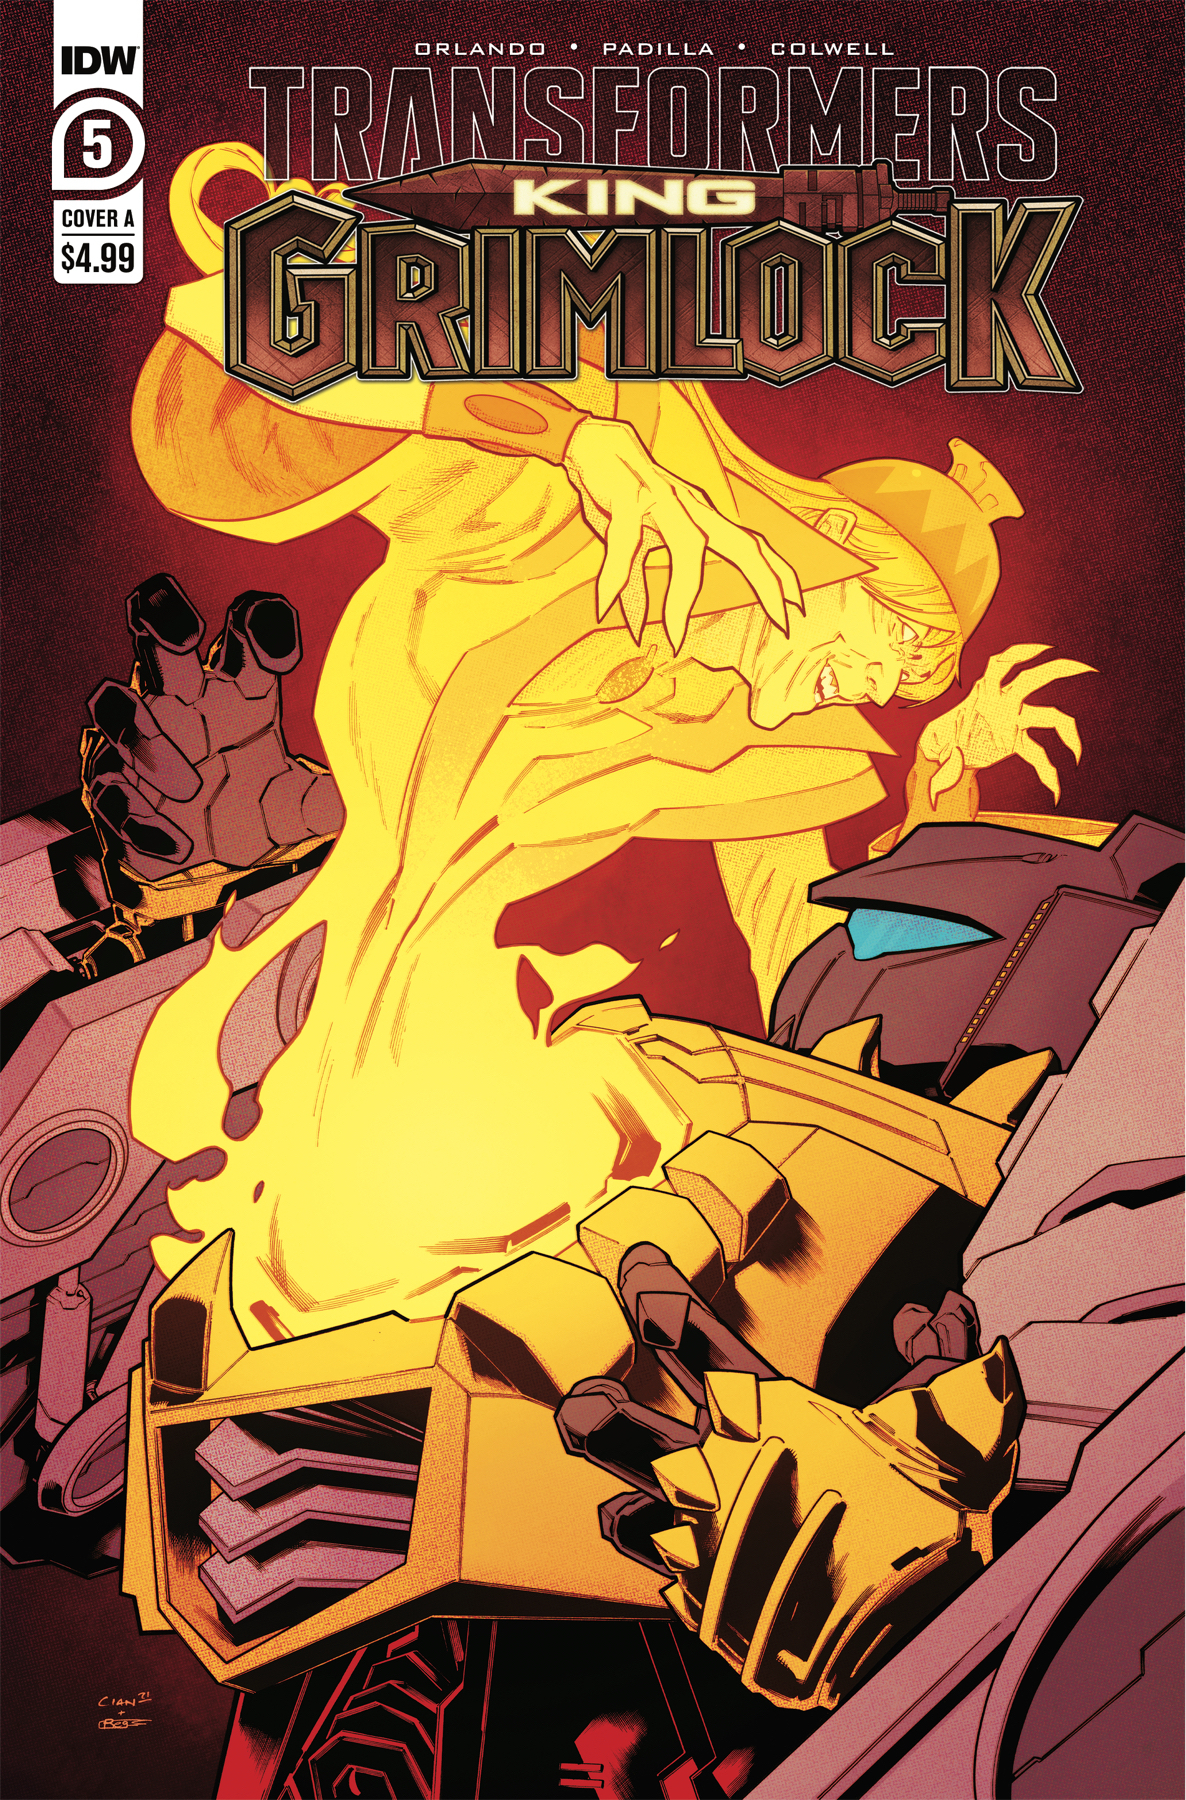 Transformers King Grimlock #5 Cover A Tormey (Of 5)